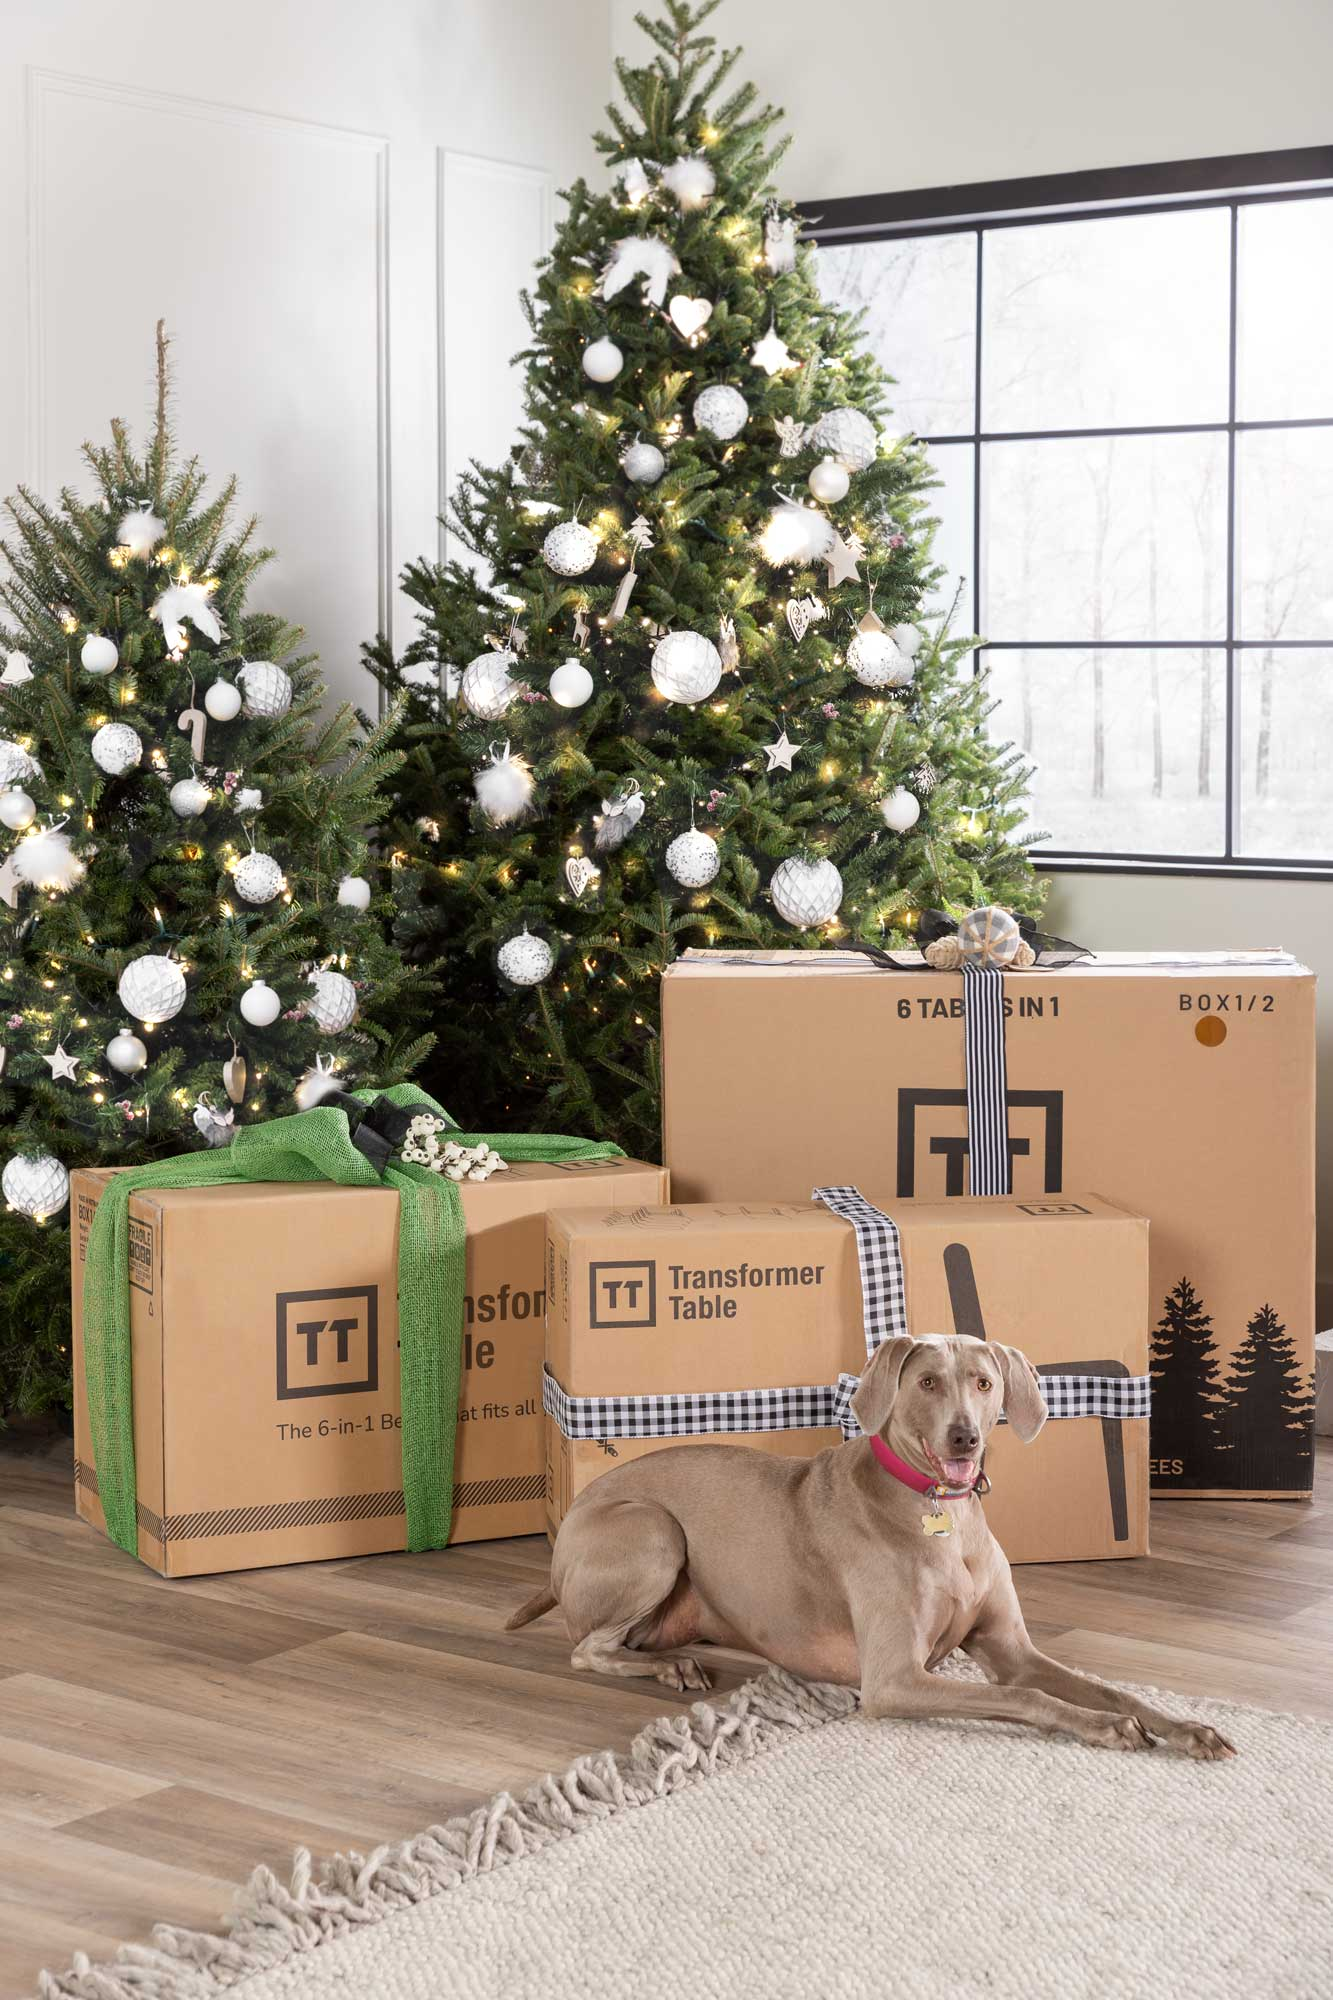 Christmas trees with boxes and a dog